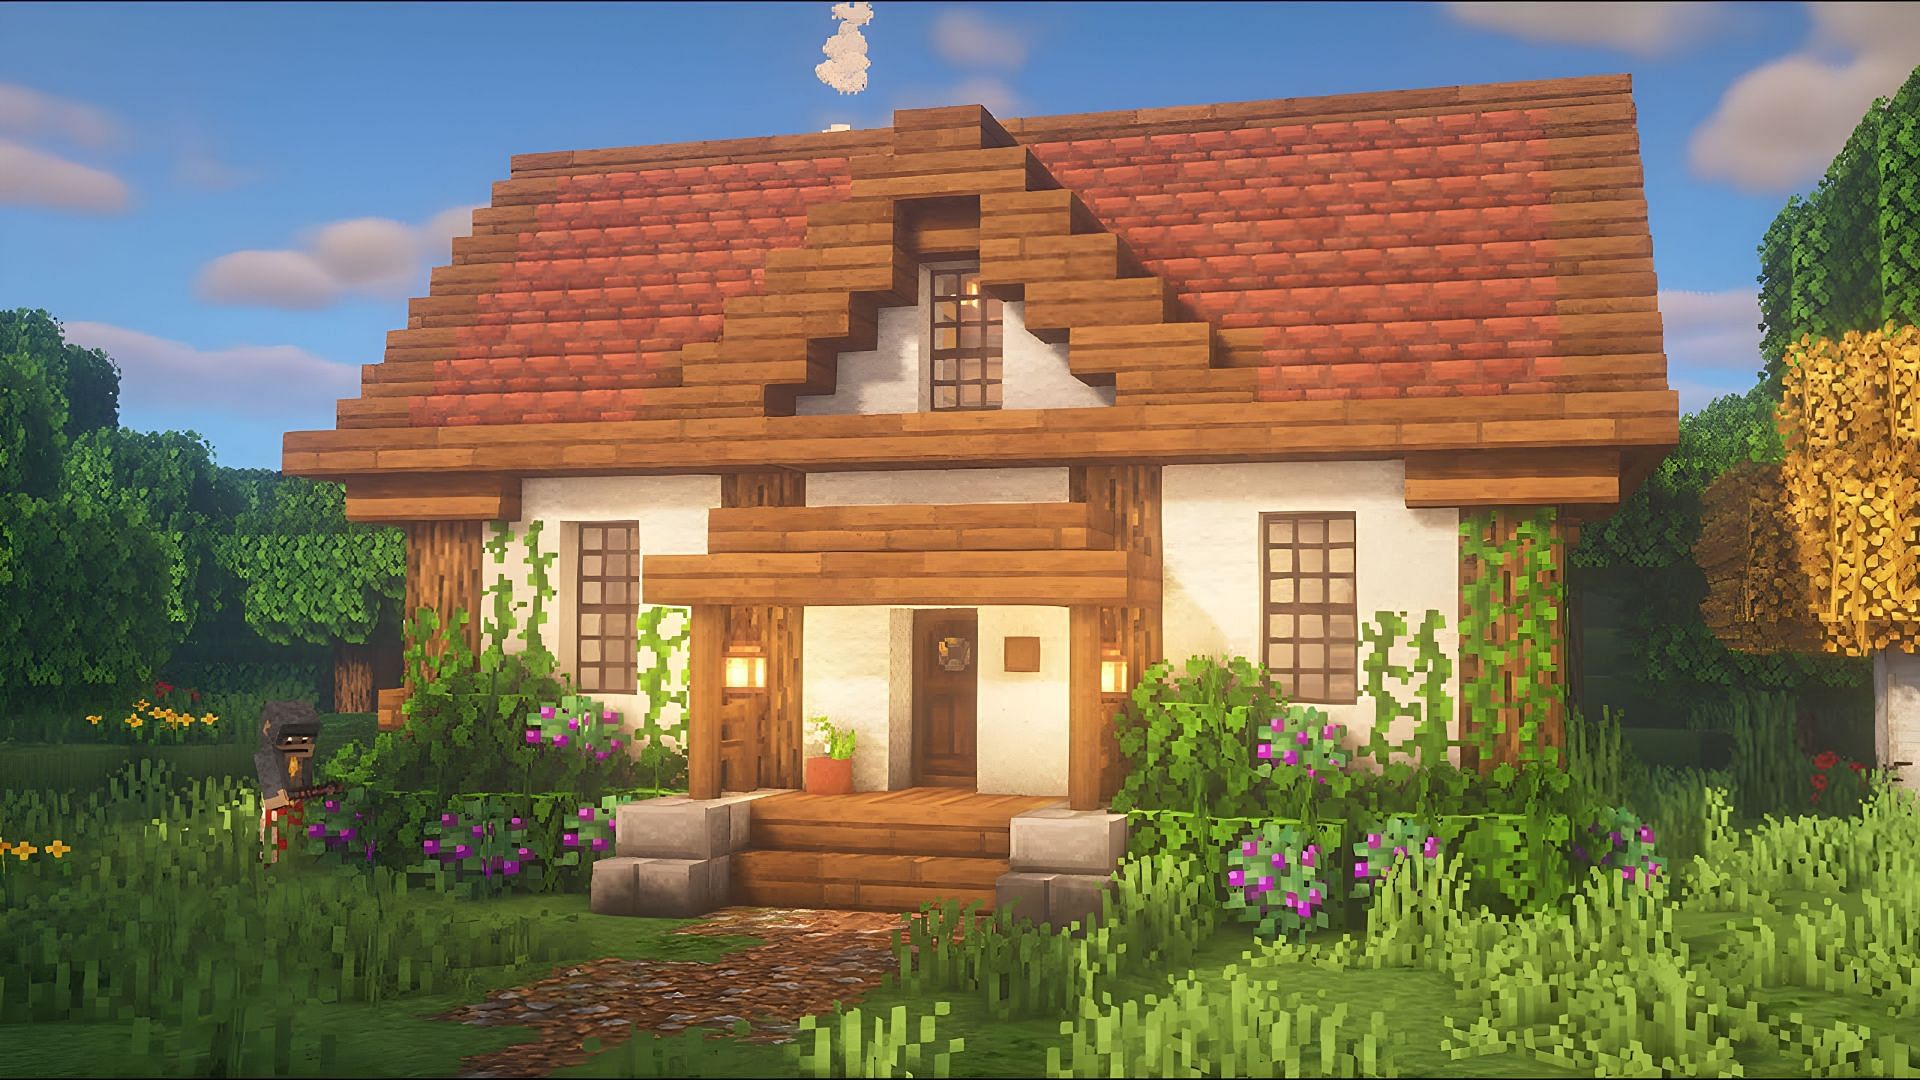 Minecraft cottages are some of the most aesthetic builds (Image via Youtube/BigTonyMC)